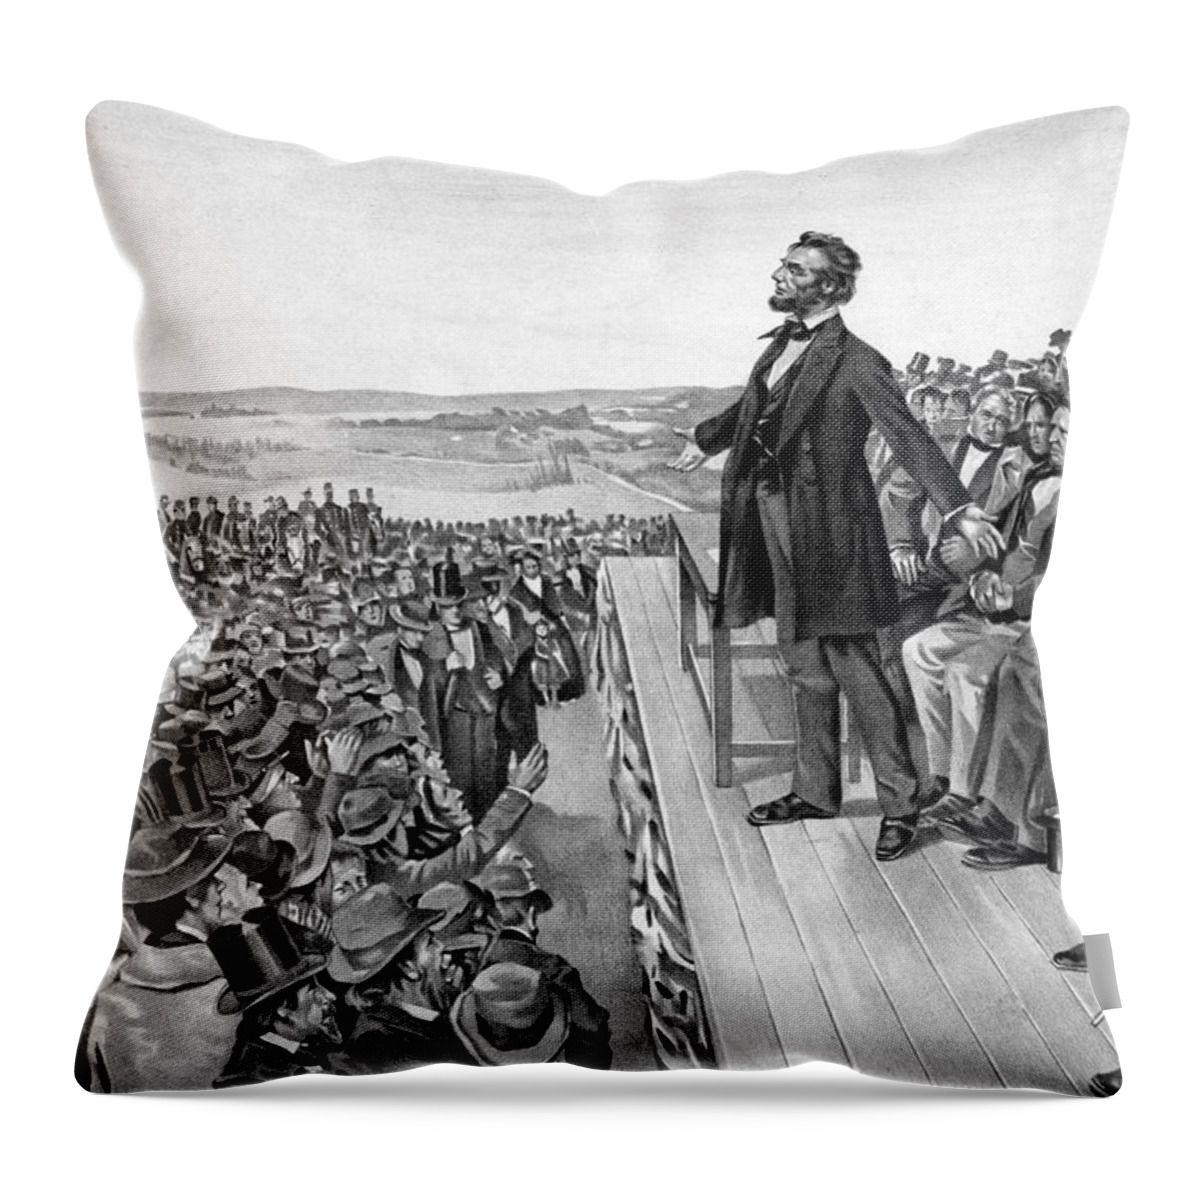 Gettysburg Address Throw Pillow featuring the drawing Lincoln Delivering The Gettysburg Address by War Is Hell Store